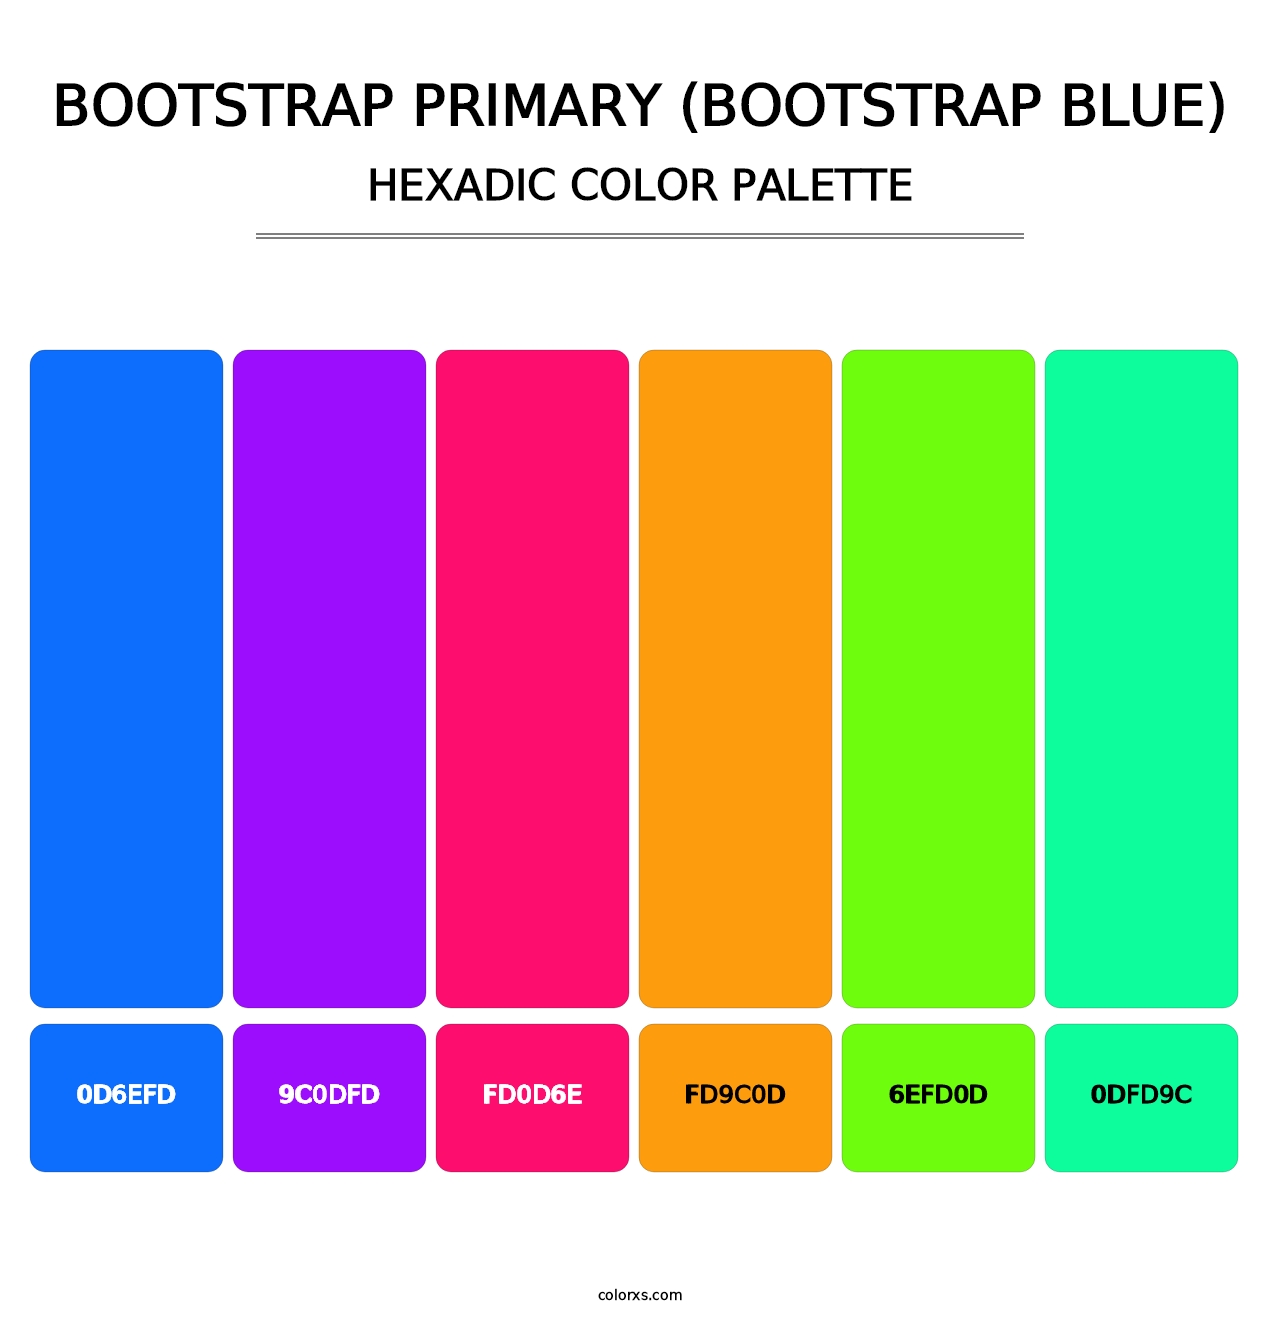 Bootstrap Primary (Bootstrap Blue) - Hexadic Color Palette